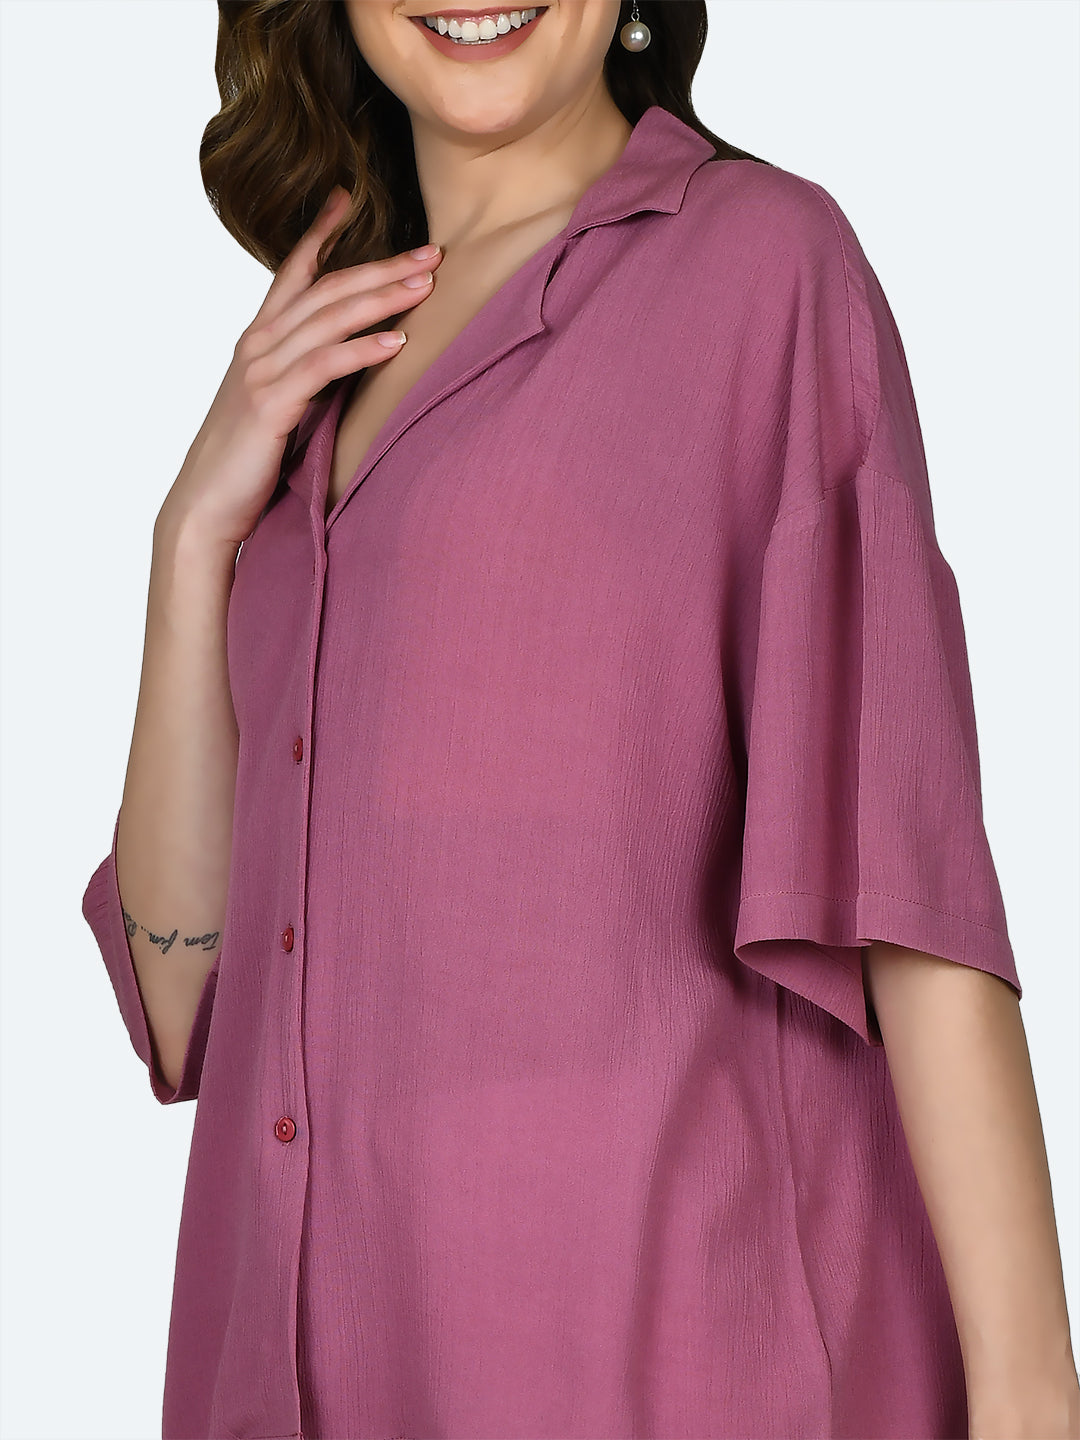 Pink Solid Oversized Shirt For Women